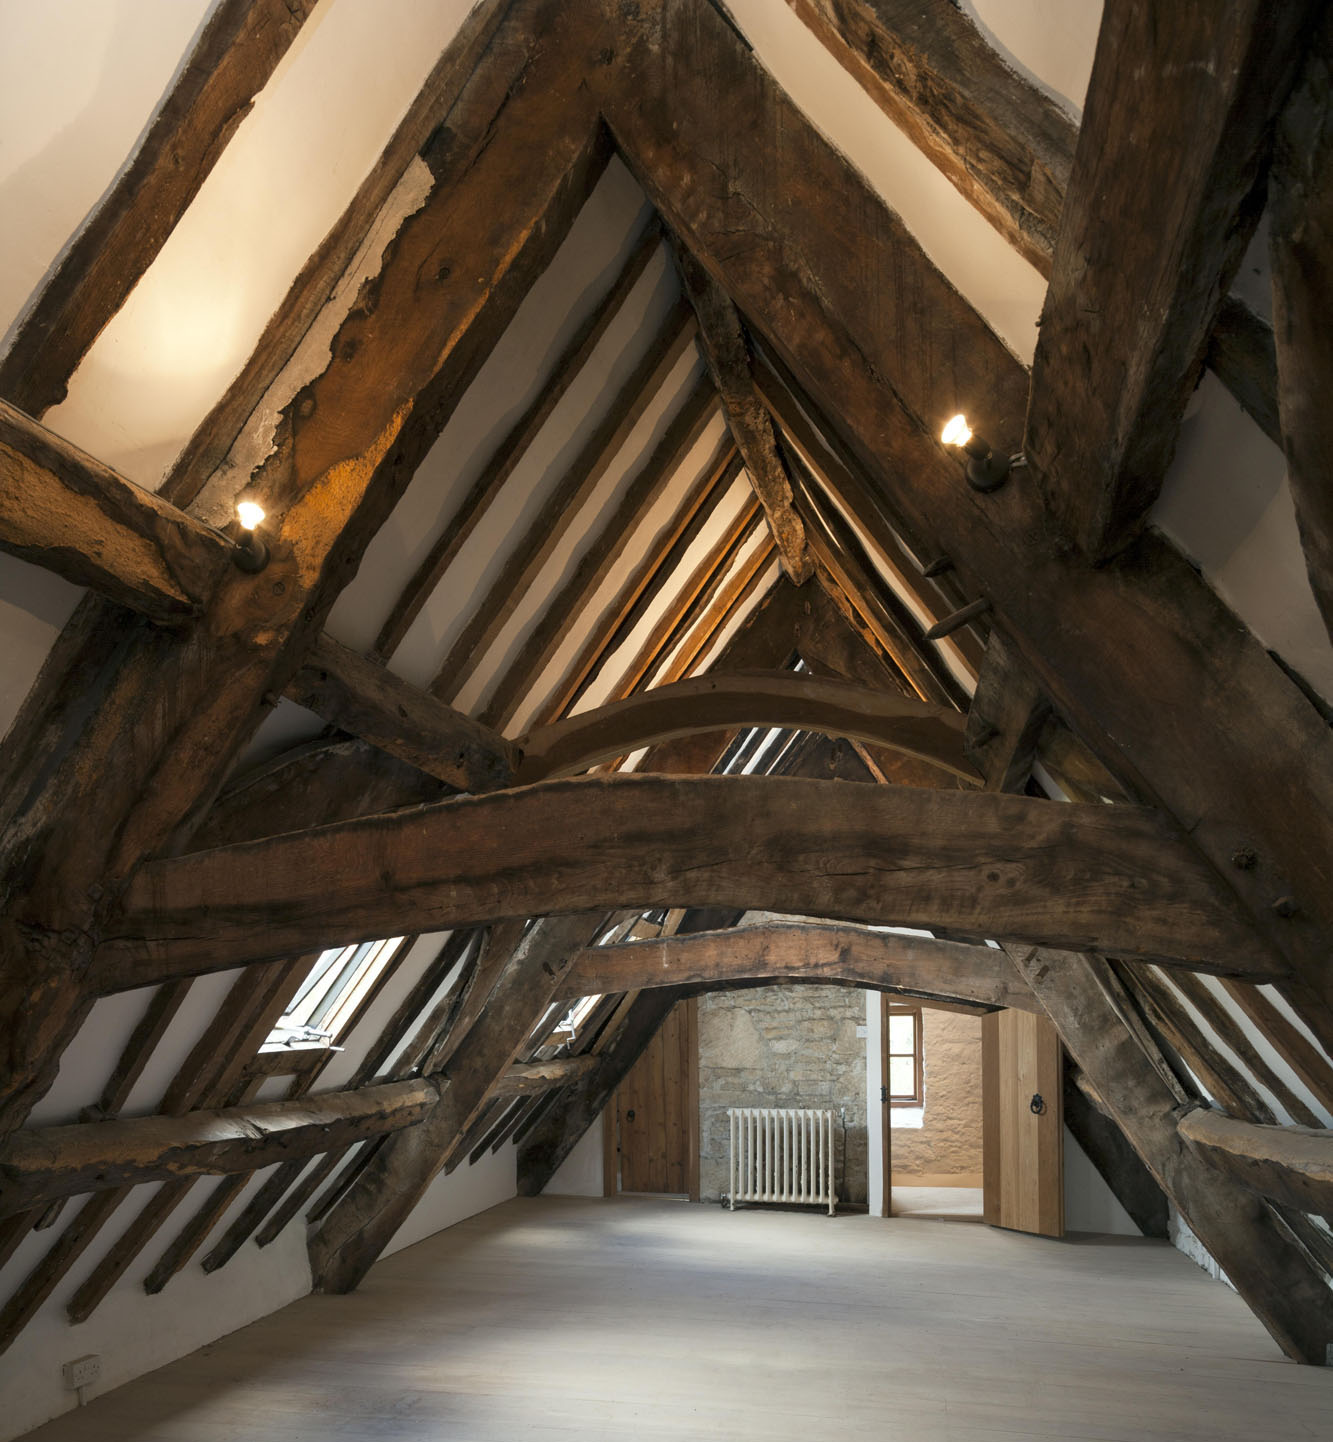 Attic room with exposed beams in an old house.